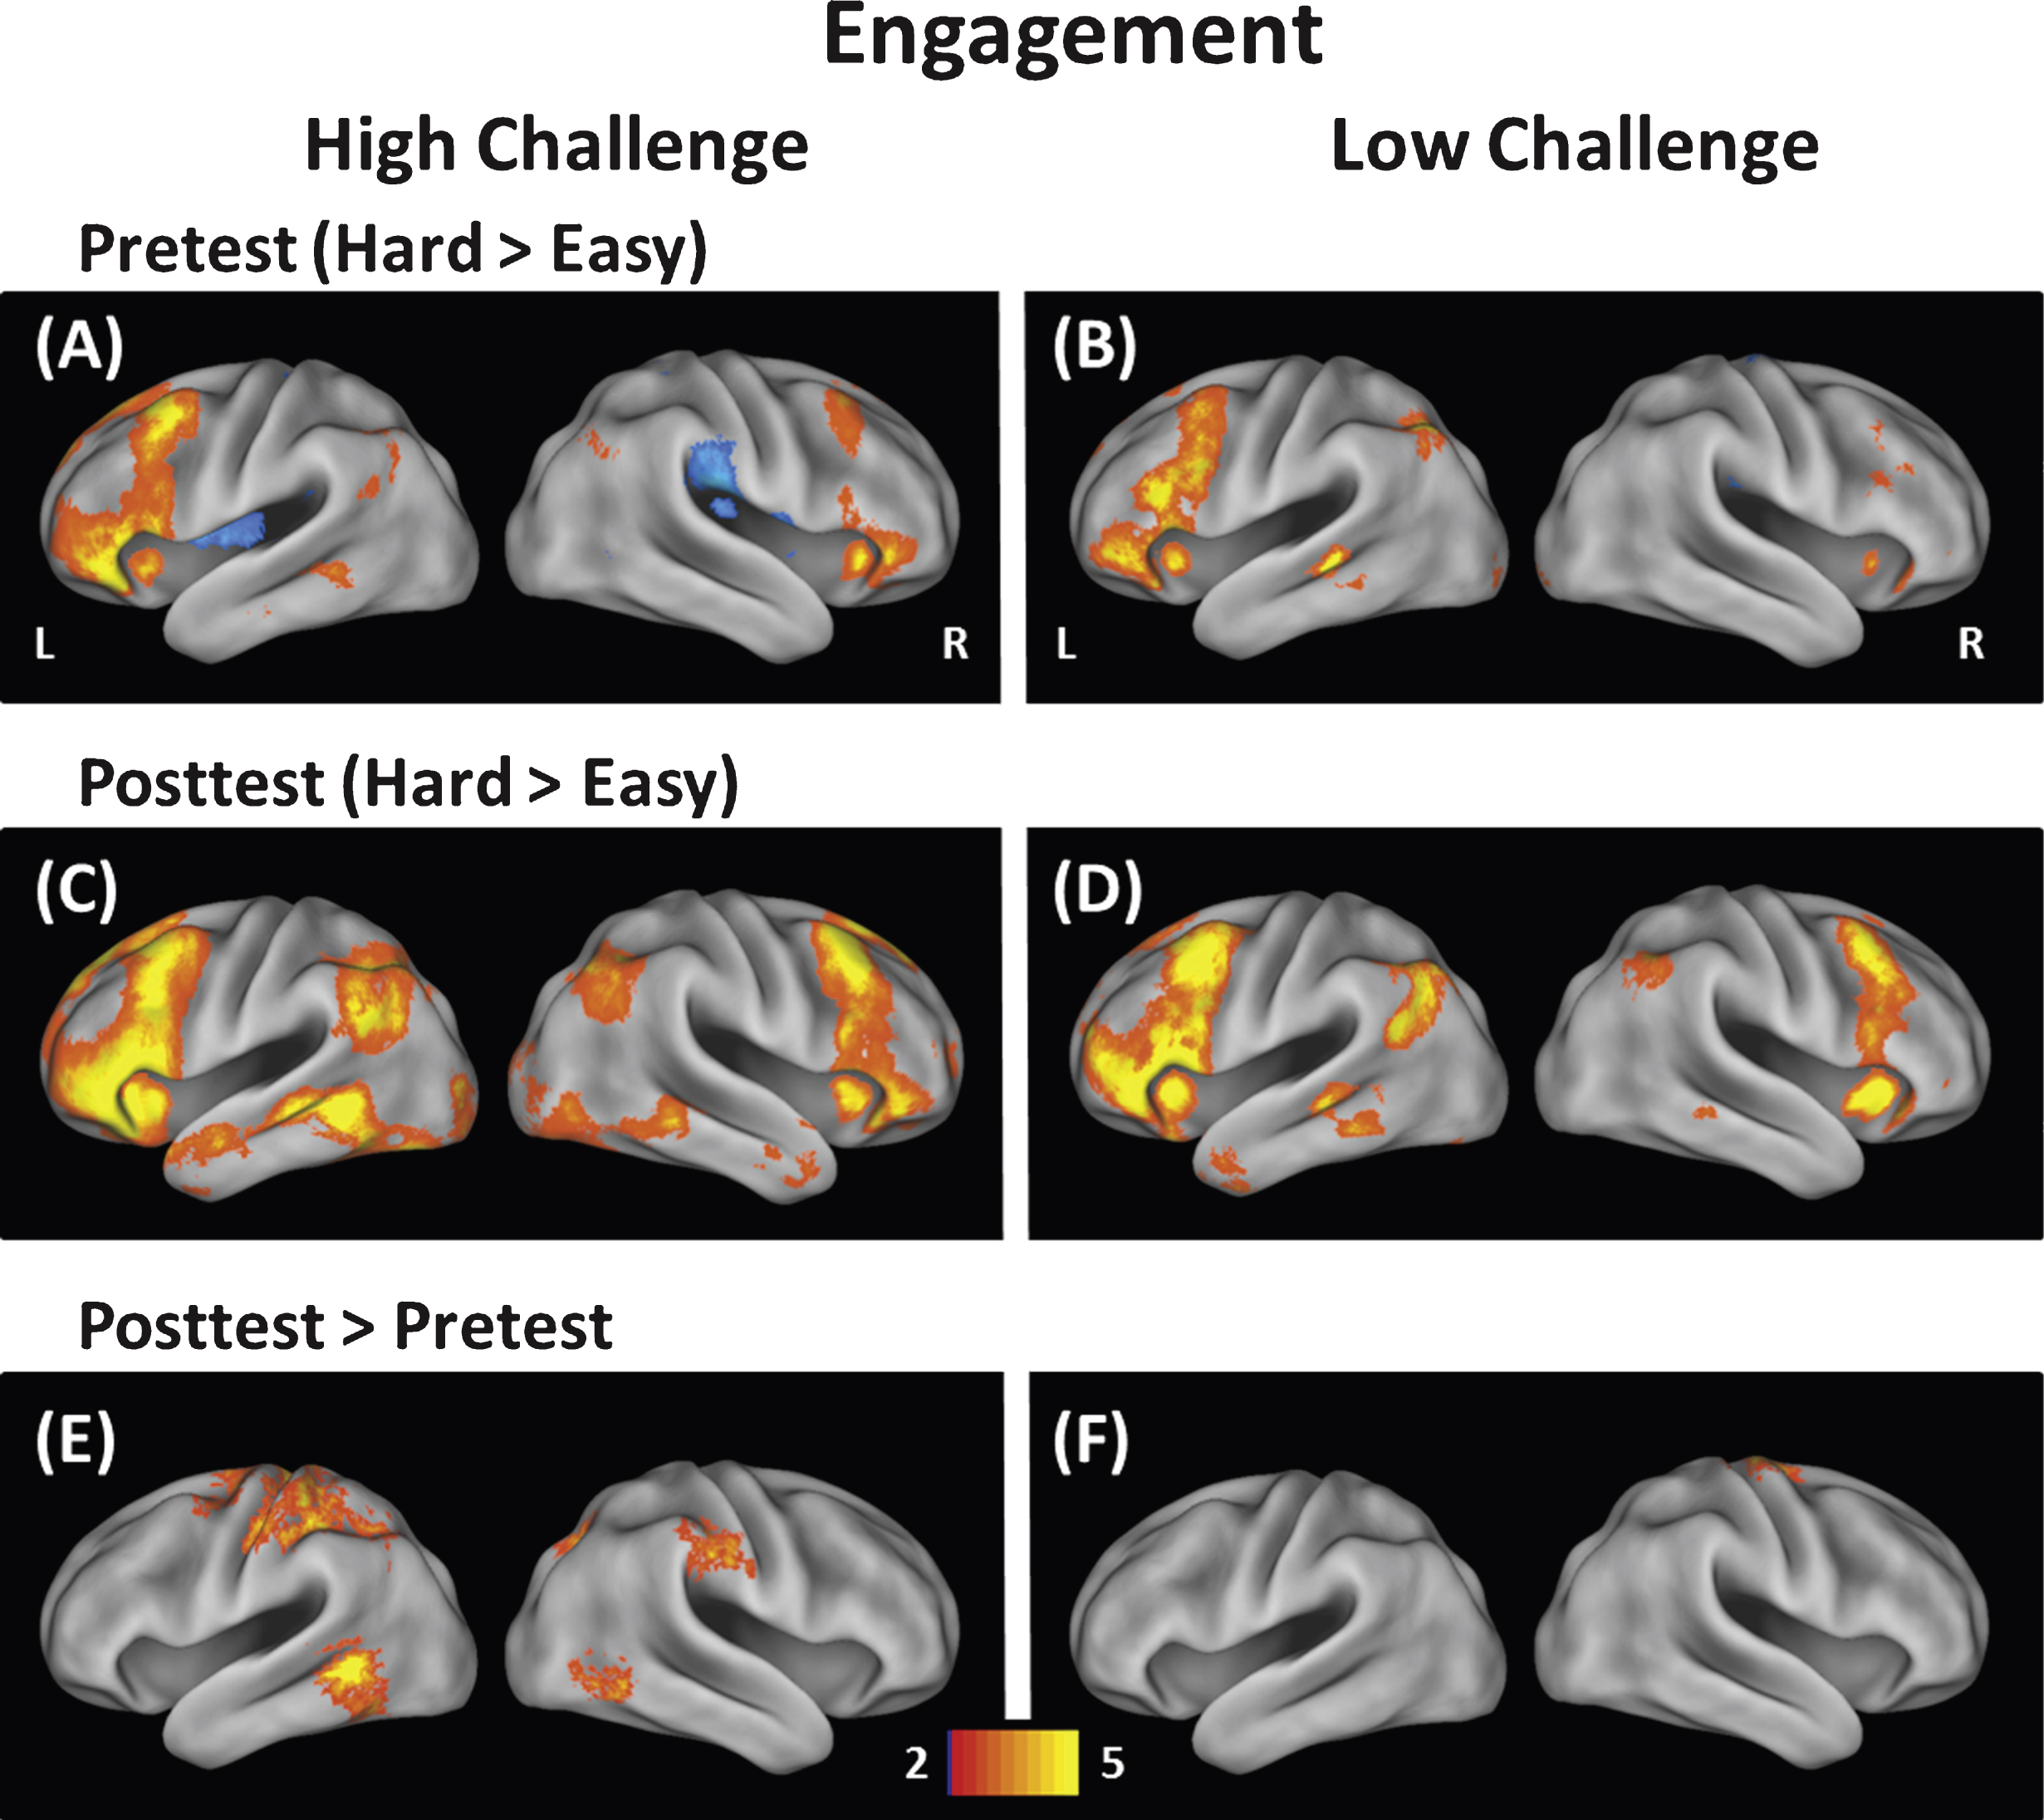 Modulation of brain activity was measured at easy and hard levels of difficulty for the High-Challenge group (left) and Low-Challenge group (right). The top panels (A & B) show modulation at pretest, the middle panels (C & D) show modulation at posttest, and the bottom panels (E & F) show modulation differences between pretest and posttest. The High-Challenge group exhibited increases in modulation of brain activity following the intervention in frontal, temporal, and parietal brain regions. In contrast, the Low-Challenge group only showed increases in modulation in one cluster (precentral gyrus).